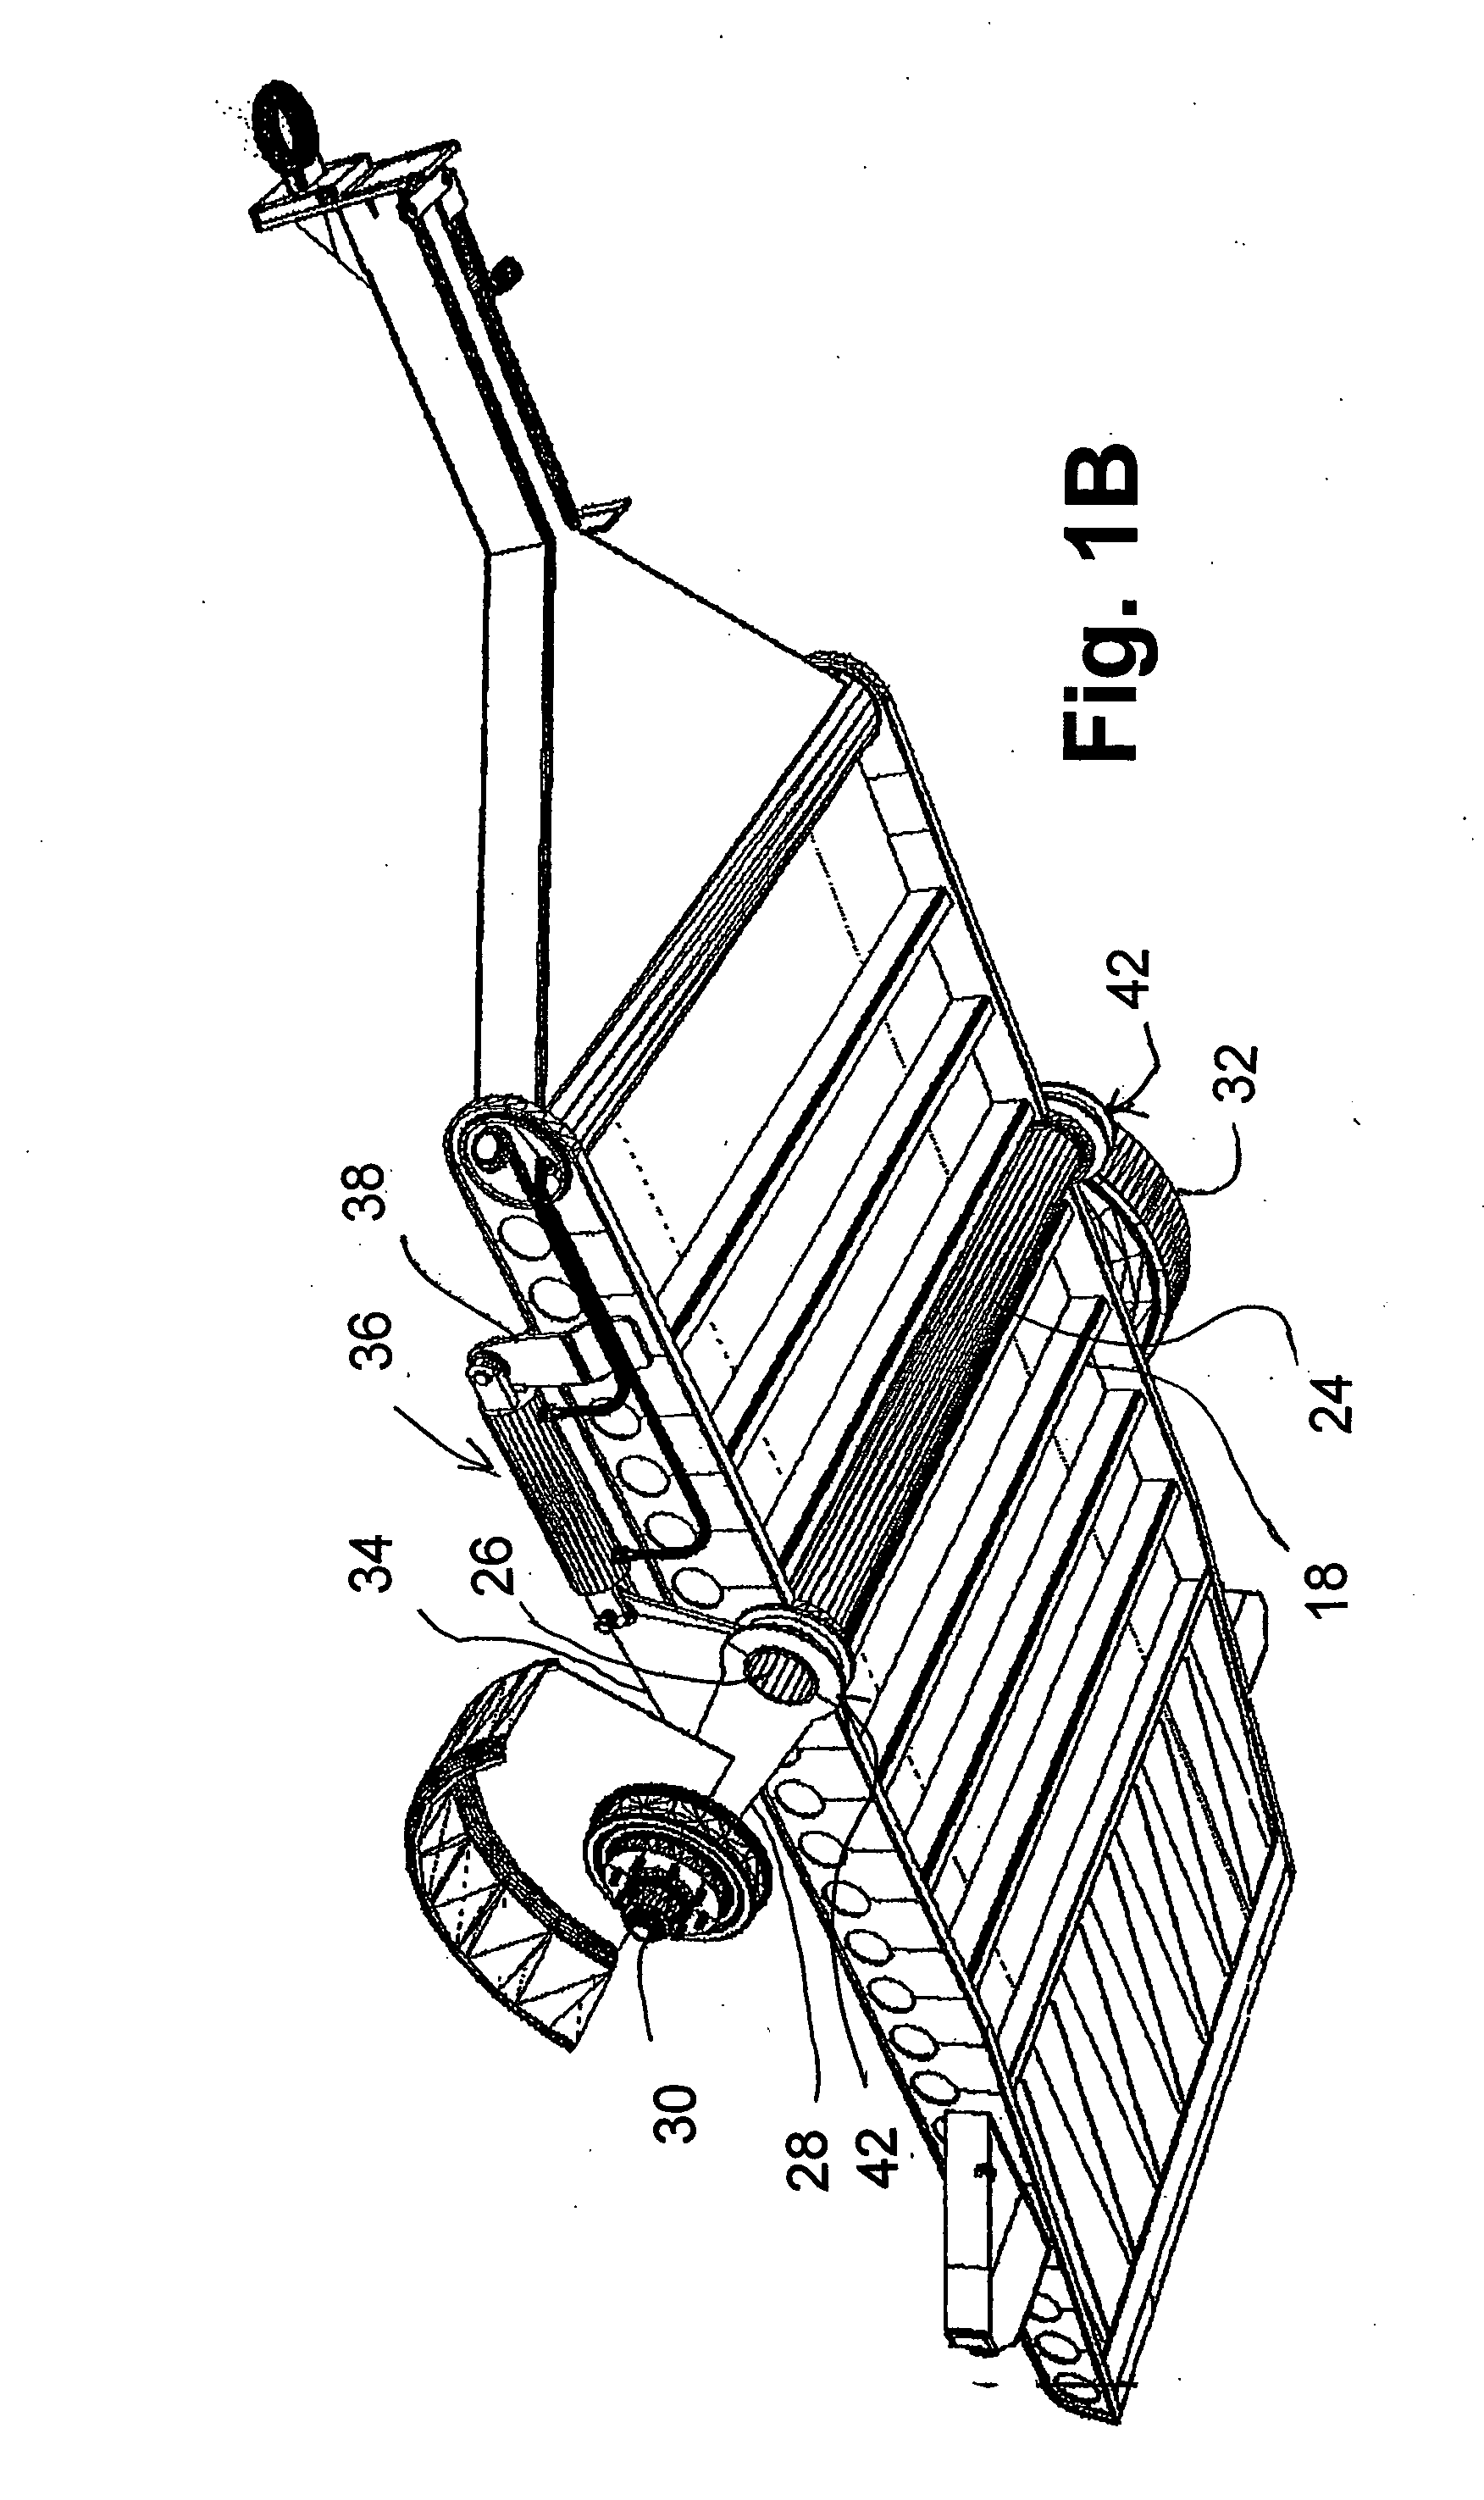 Method and apparatus for an adjustable trailer